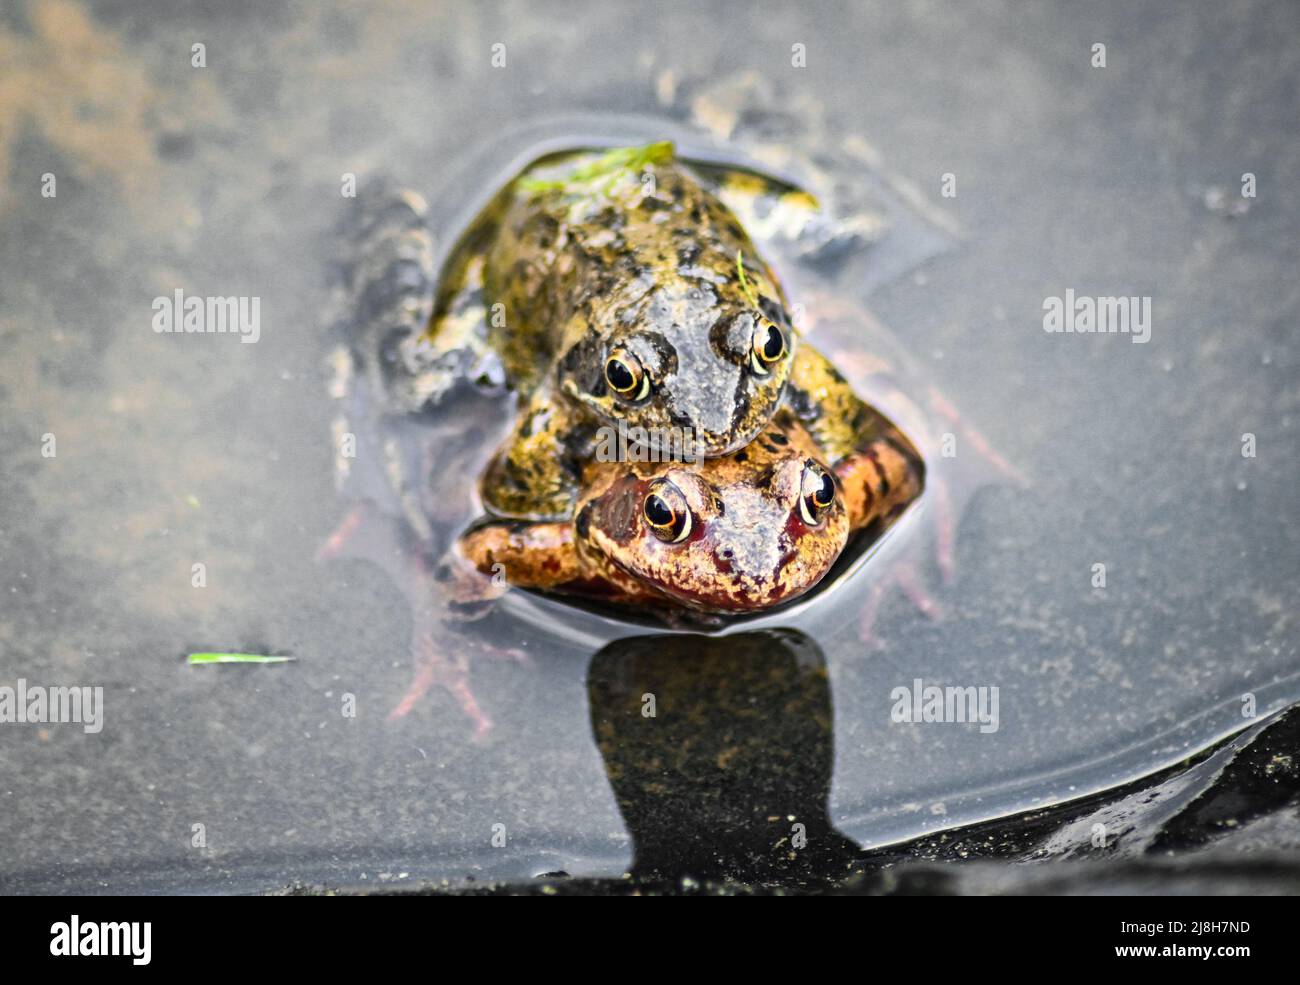 English common frogs, Rana temporaria mating on the side of a garden pond. Stock Photo